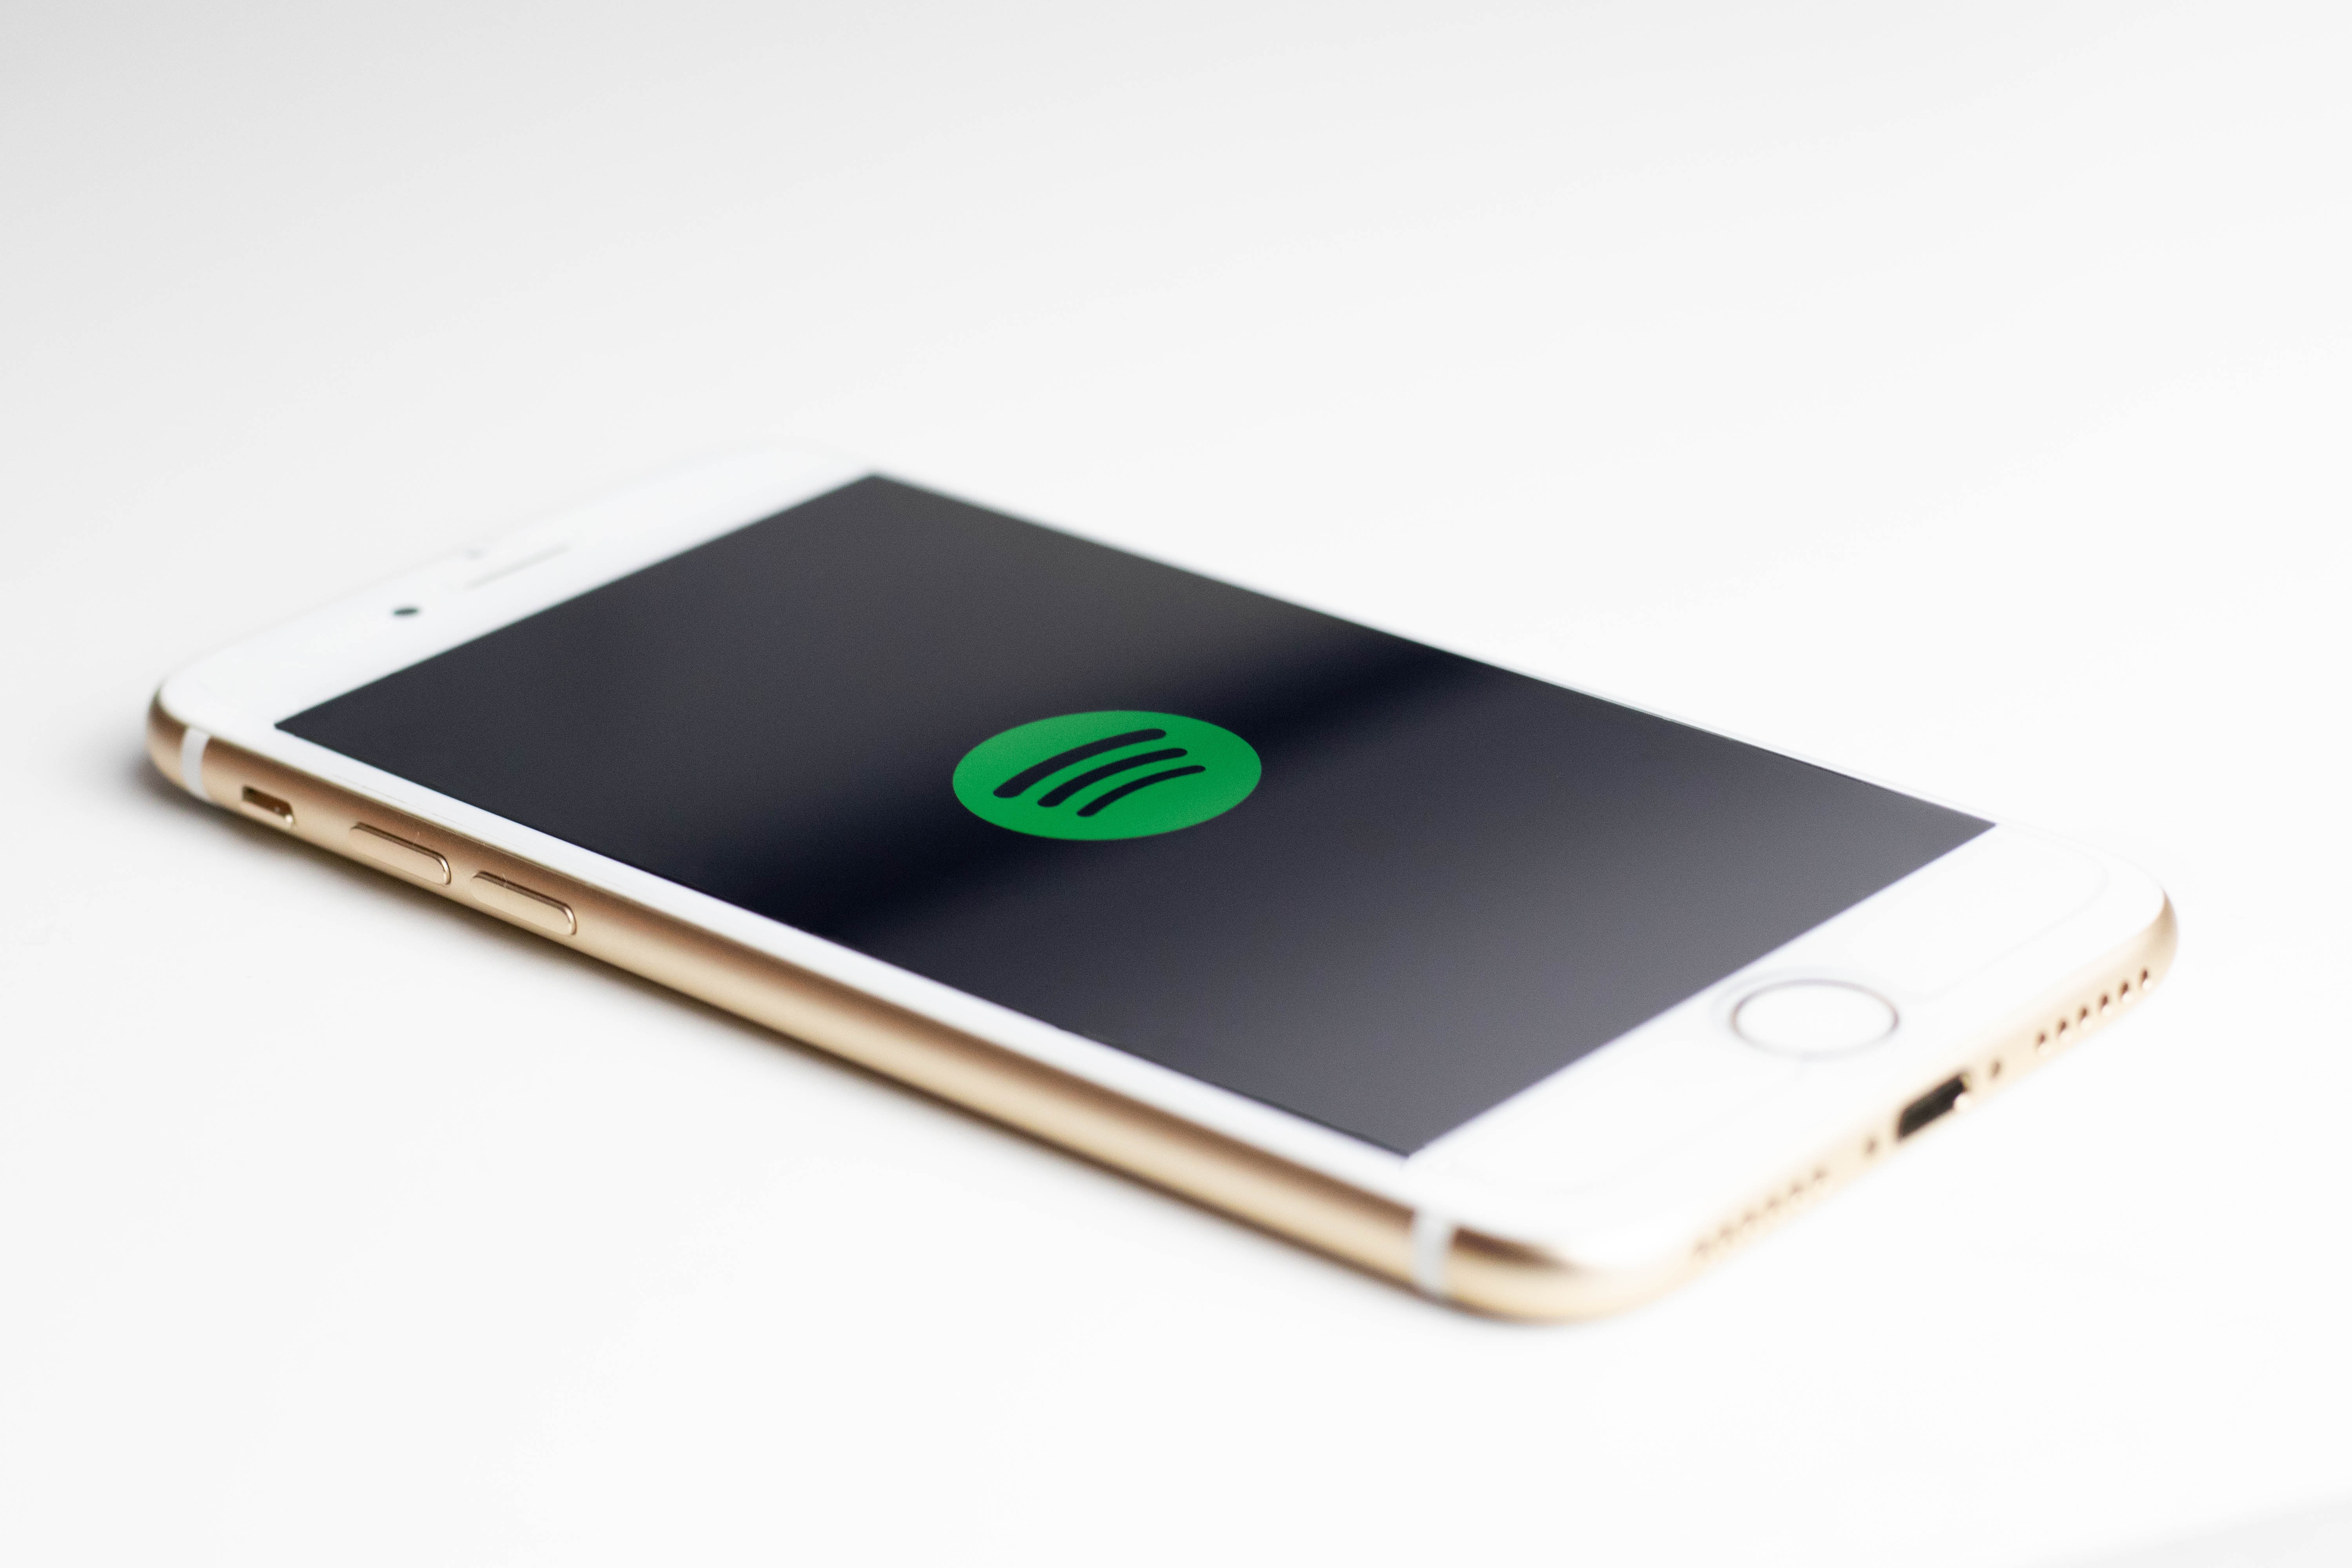 Spotify lodges antitrust complaint against Apple: it’s ‘time to play fair’ in the music streaming industry - sara kurfess wXU9yeANElg unsplash